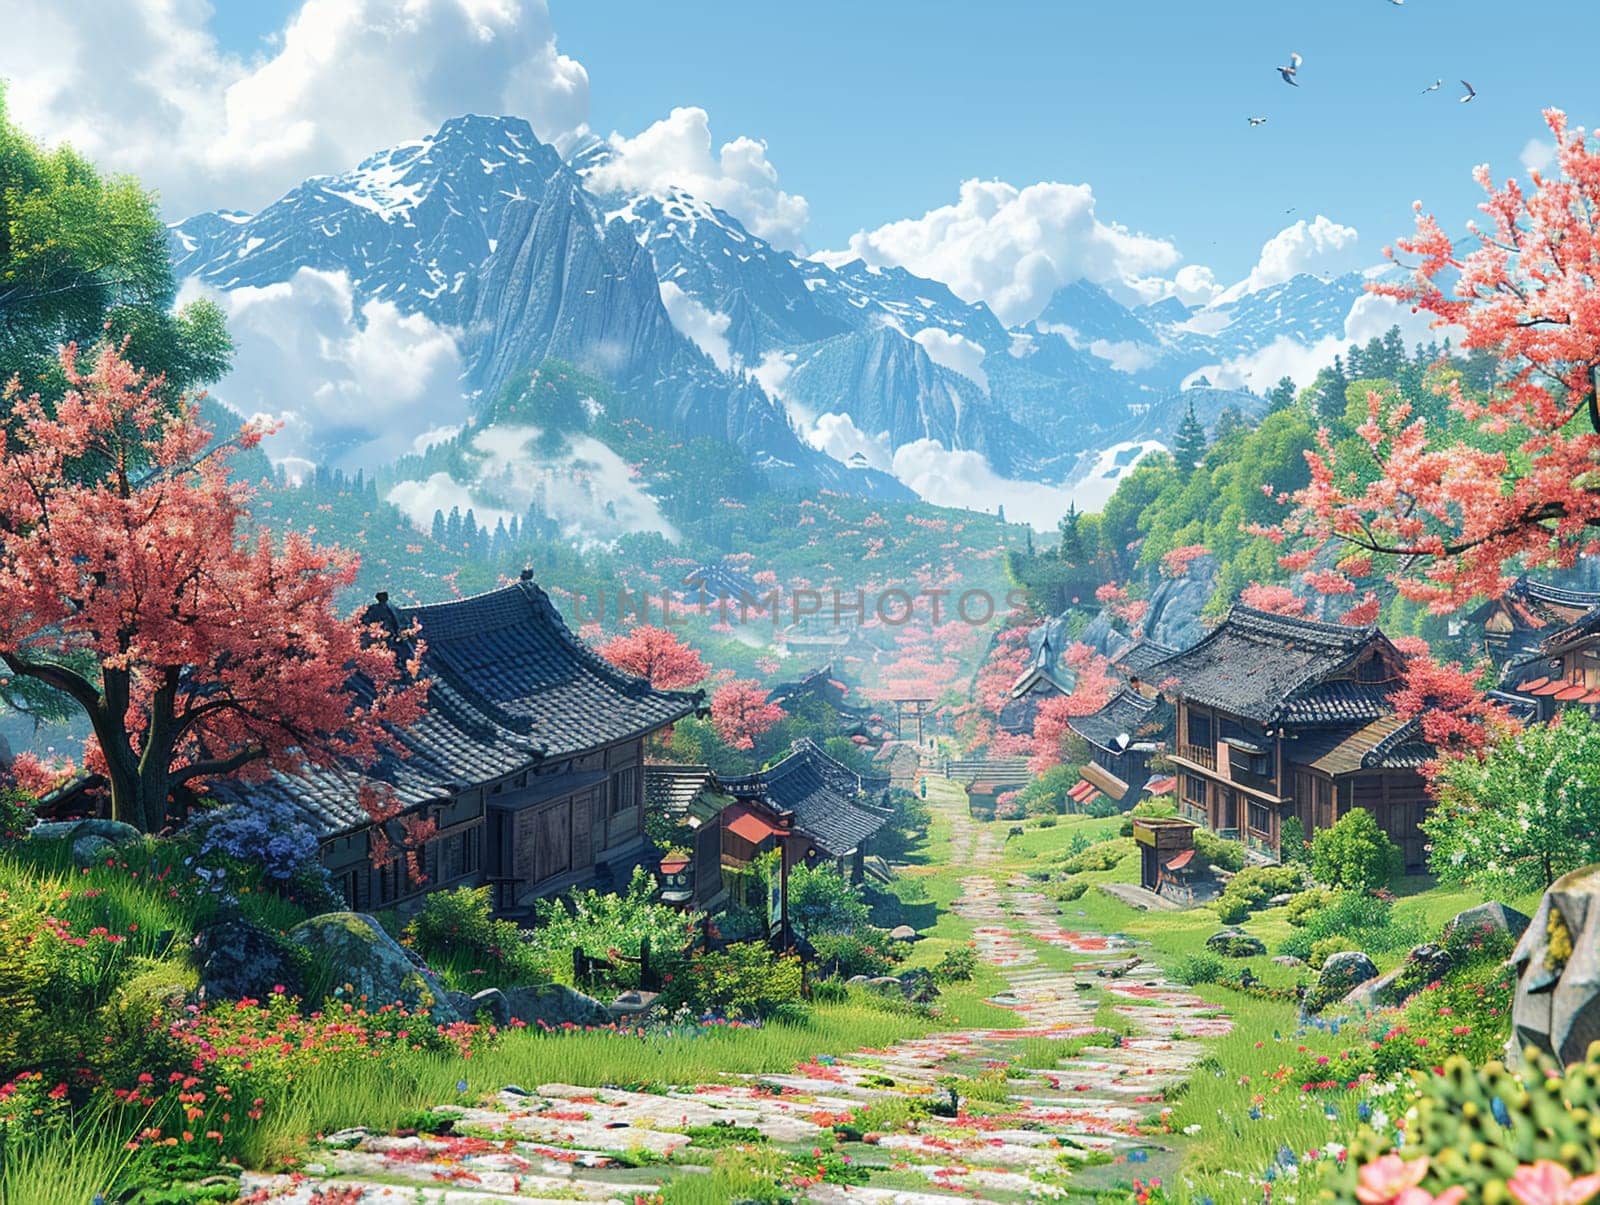 Digitally created image of a peaceful village, blending anime charm with realistic textures.